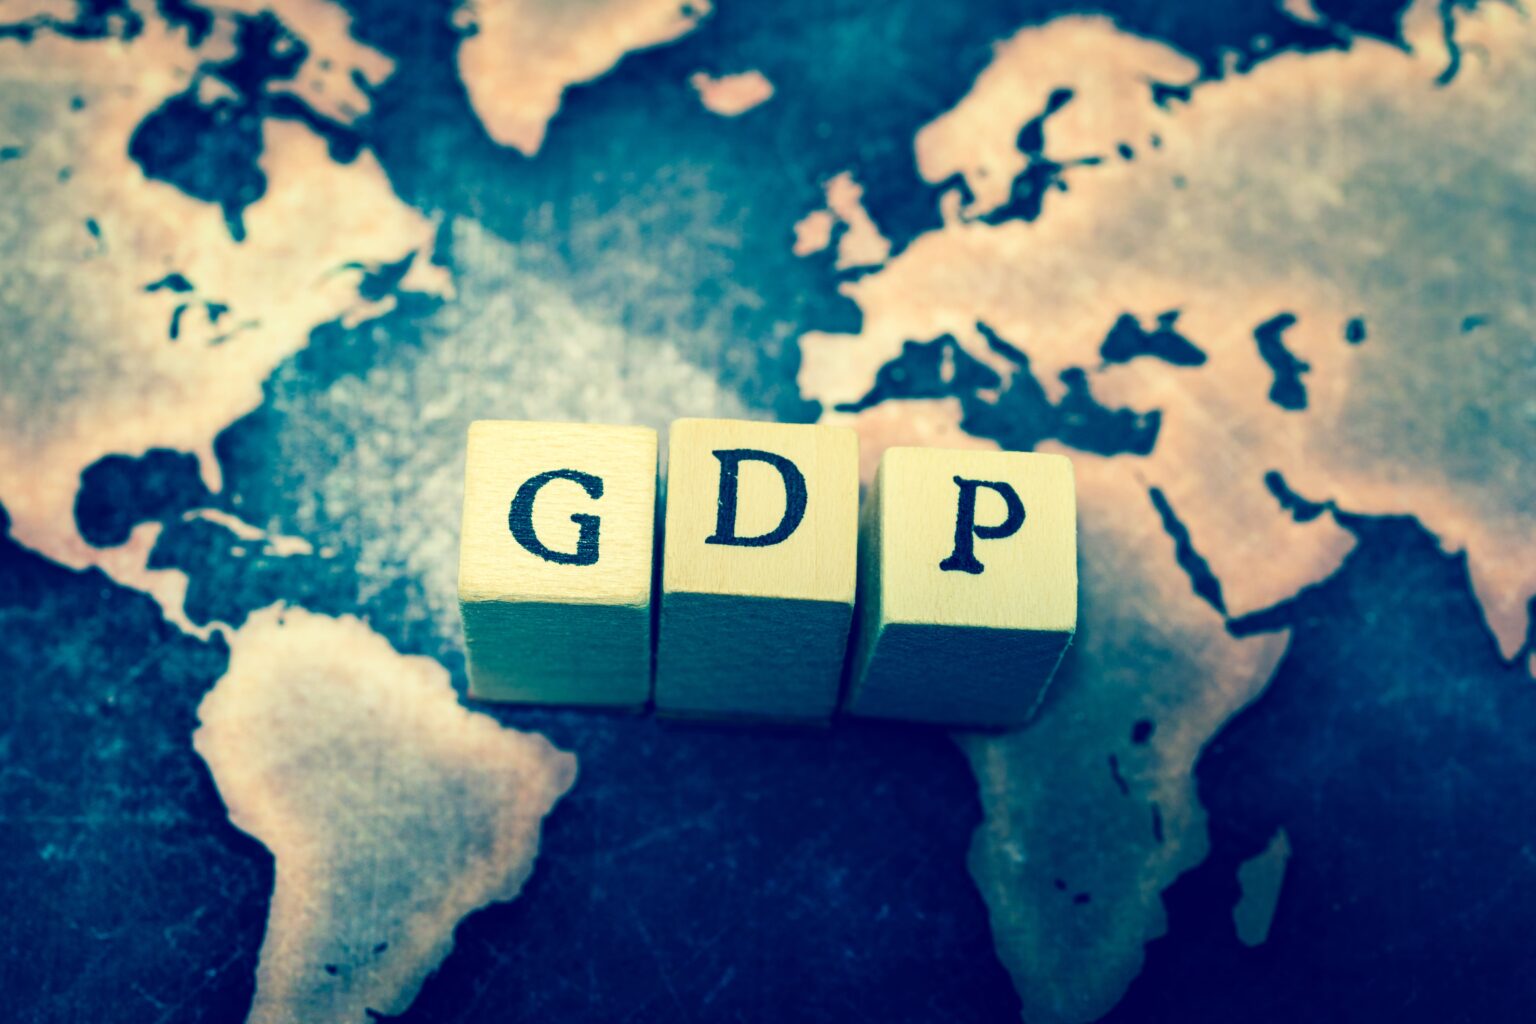 GDP stands for gross domestic product, which measures the monetary value of all goods and services produced within a country in a specific time period. It includes all business activity within the nation's borders, including both public and private sector activities.